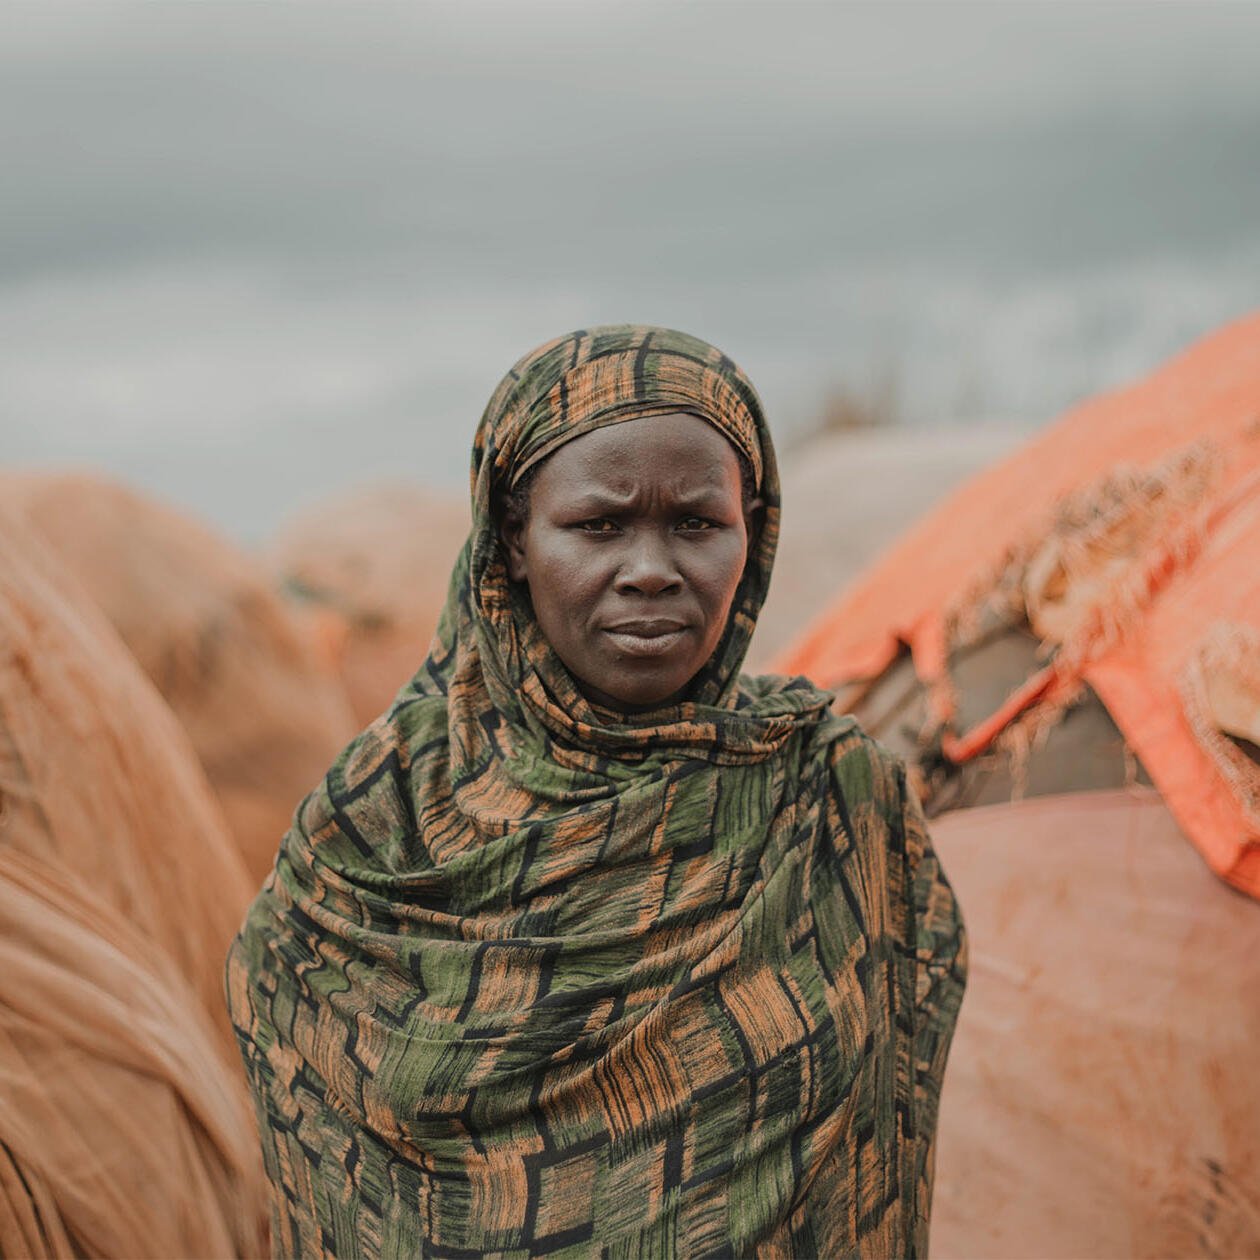 A woman standing in the Somalia desert.